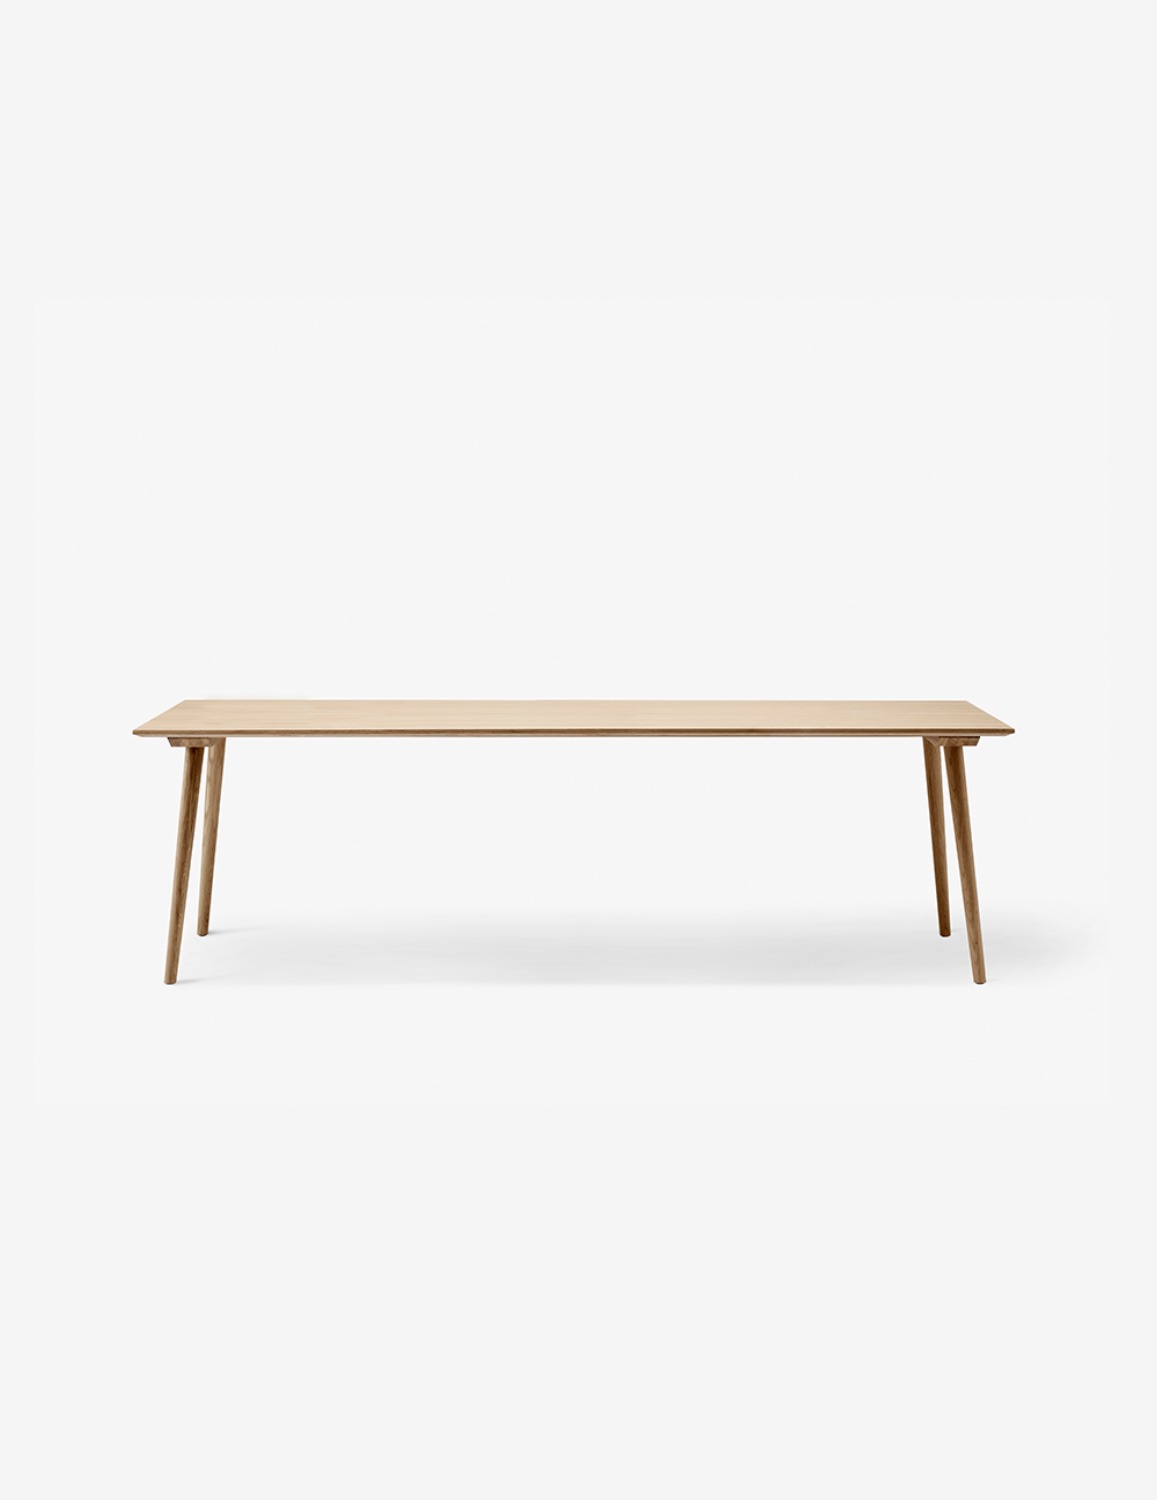 [&amp;Tradition] In Between Table / SK6 (Clear Oak)